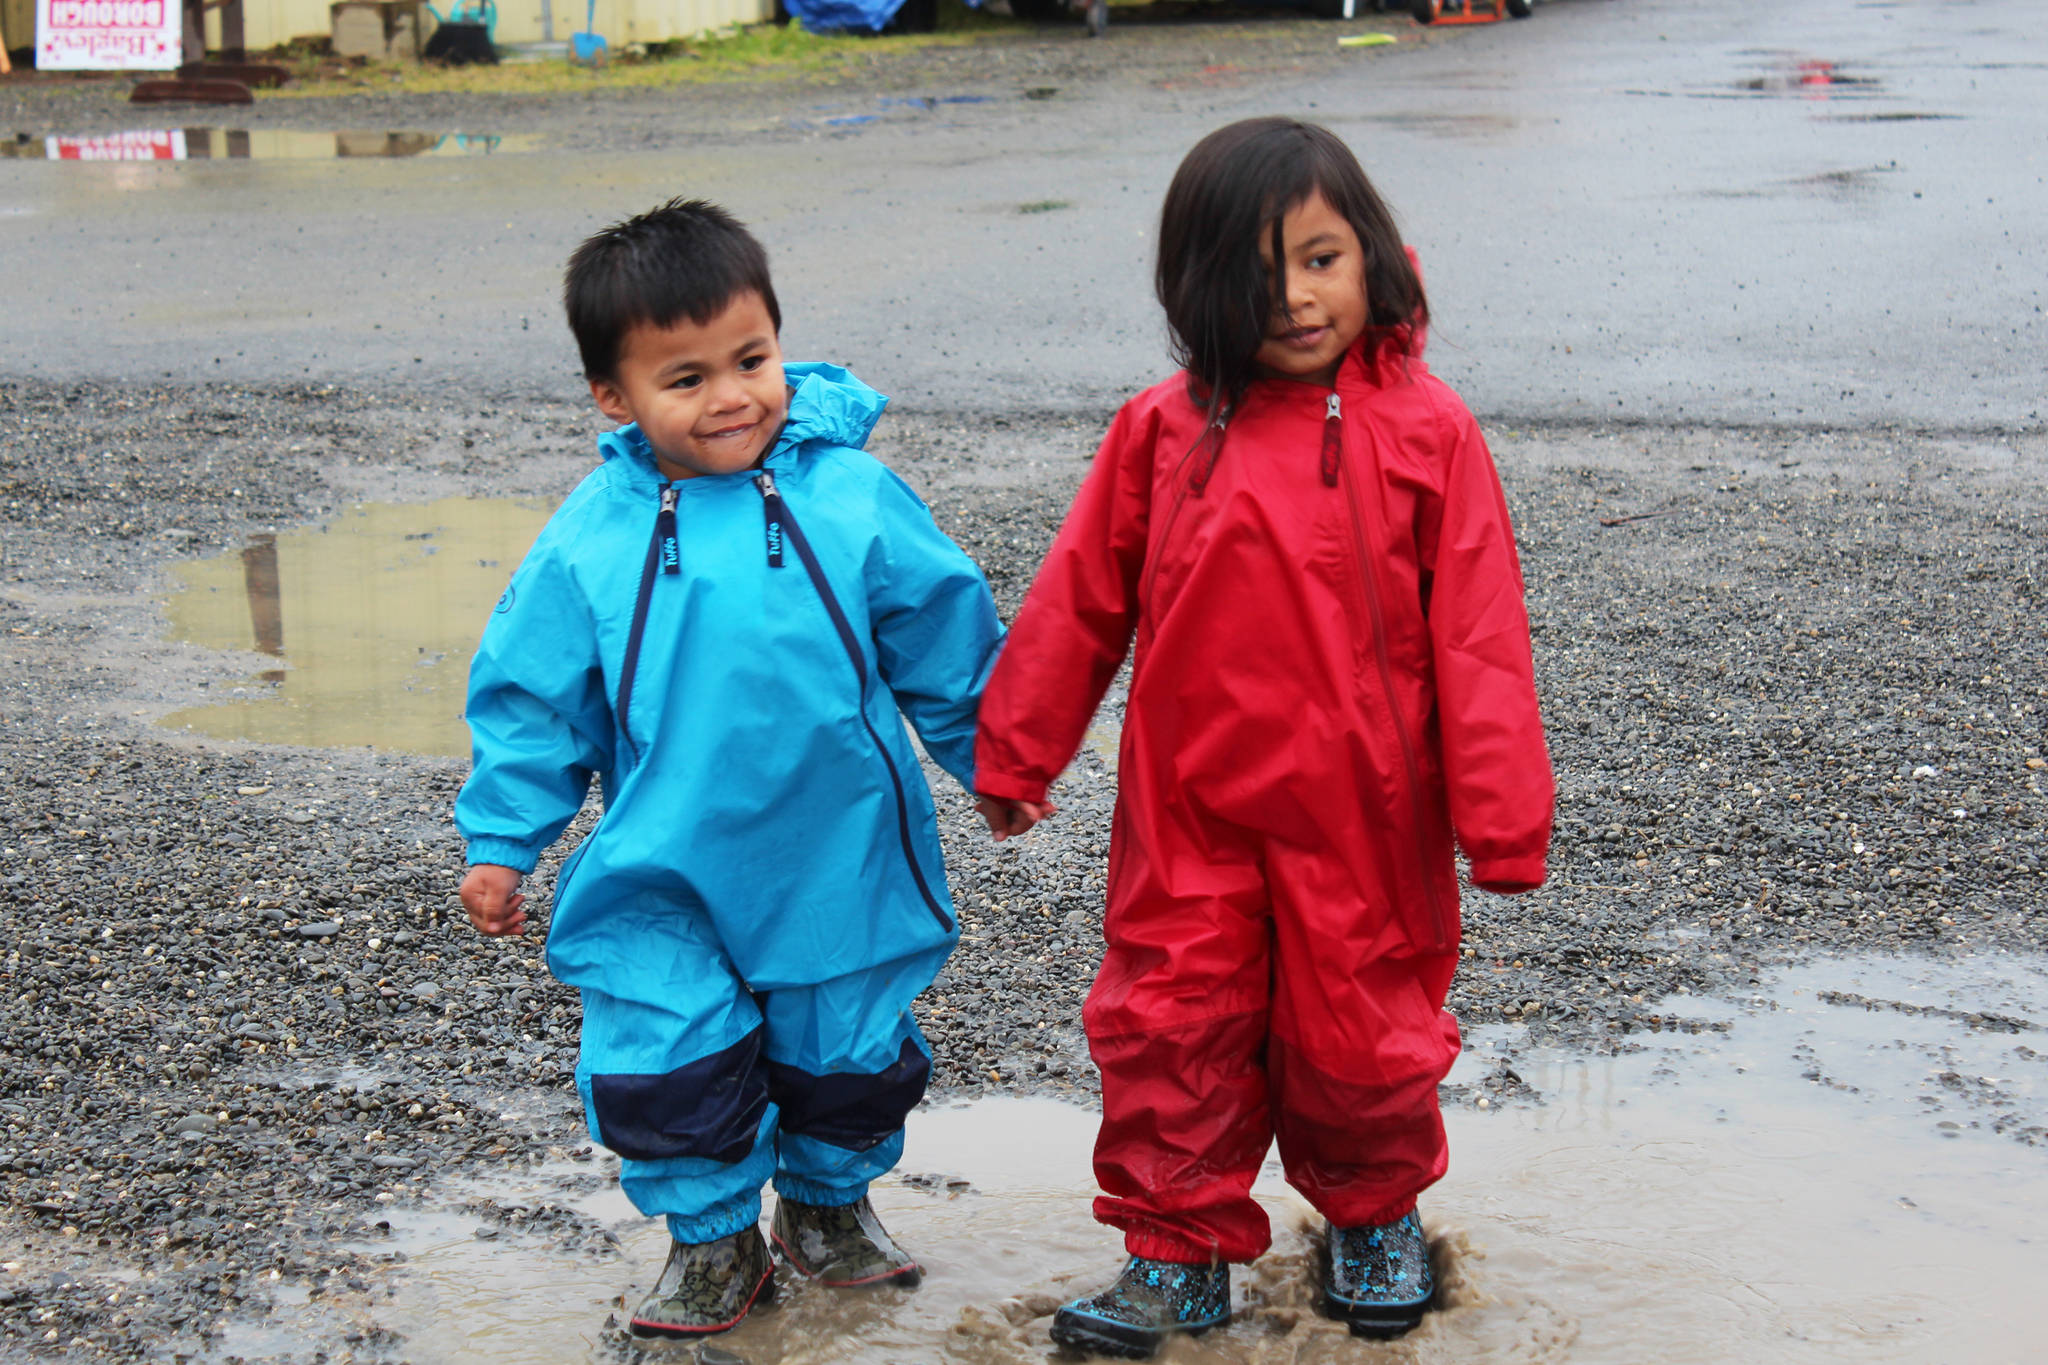 Siblings Everett Malone, 3, and Kaydence Malone, 4, splash around in the puddles spotting the fairgrounds during this year’s Kenai Peninsula Fair on Friday, Aug. 18, 2017 in Ninilchik, Alaska. (Photo by Megan Pacer/Homer News)